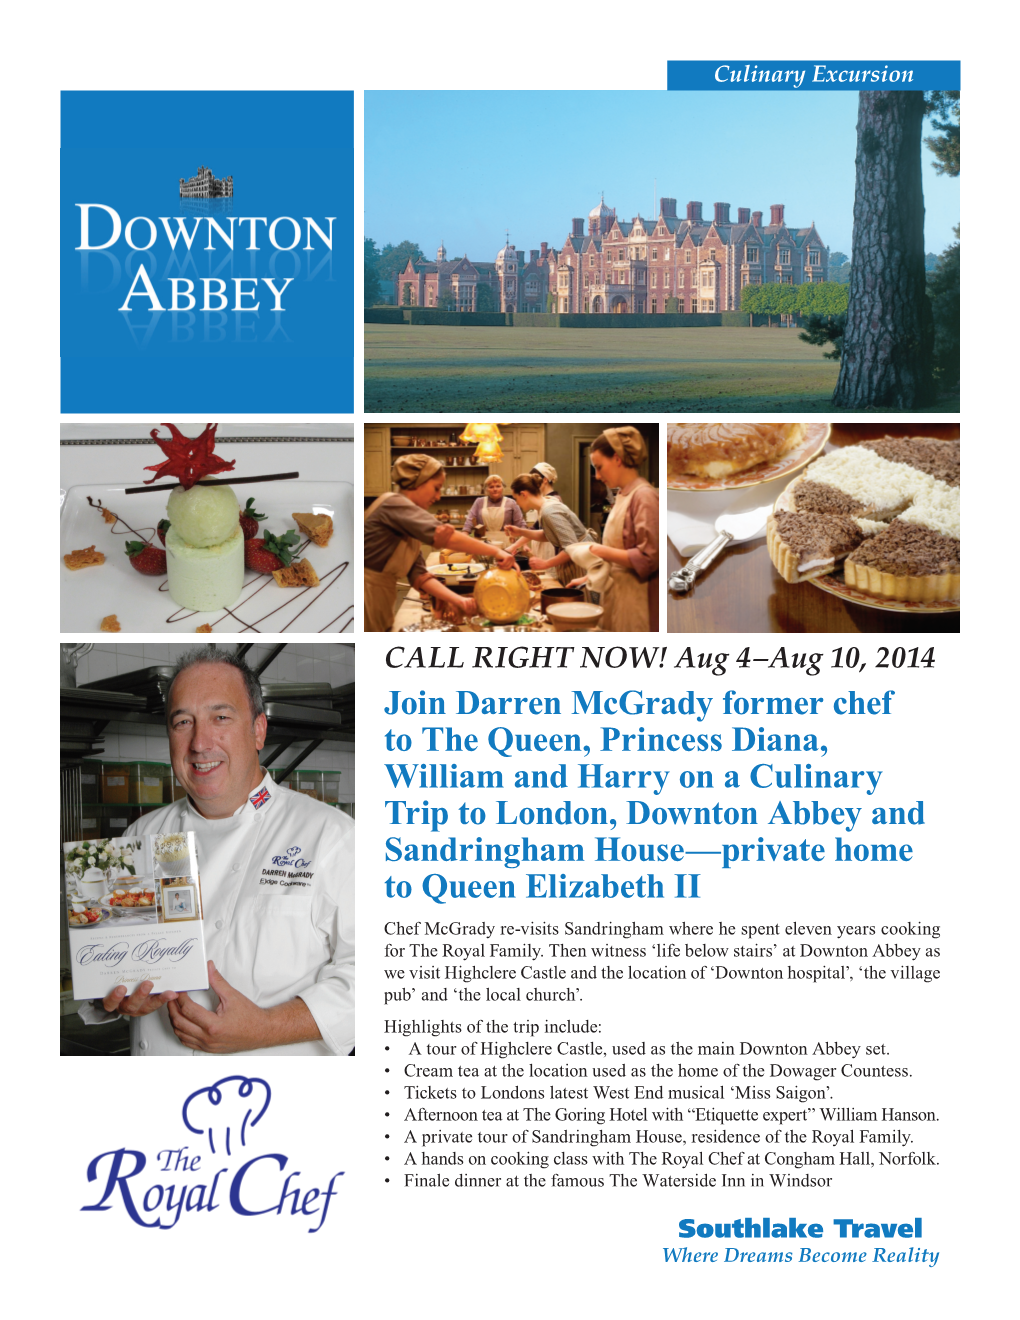 Join Darren Mcgrady Former Chef to the Queen, Princess Diana